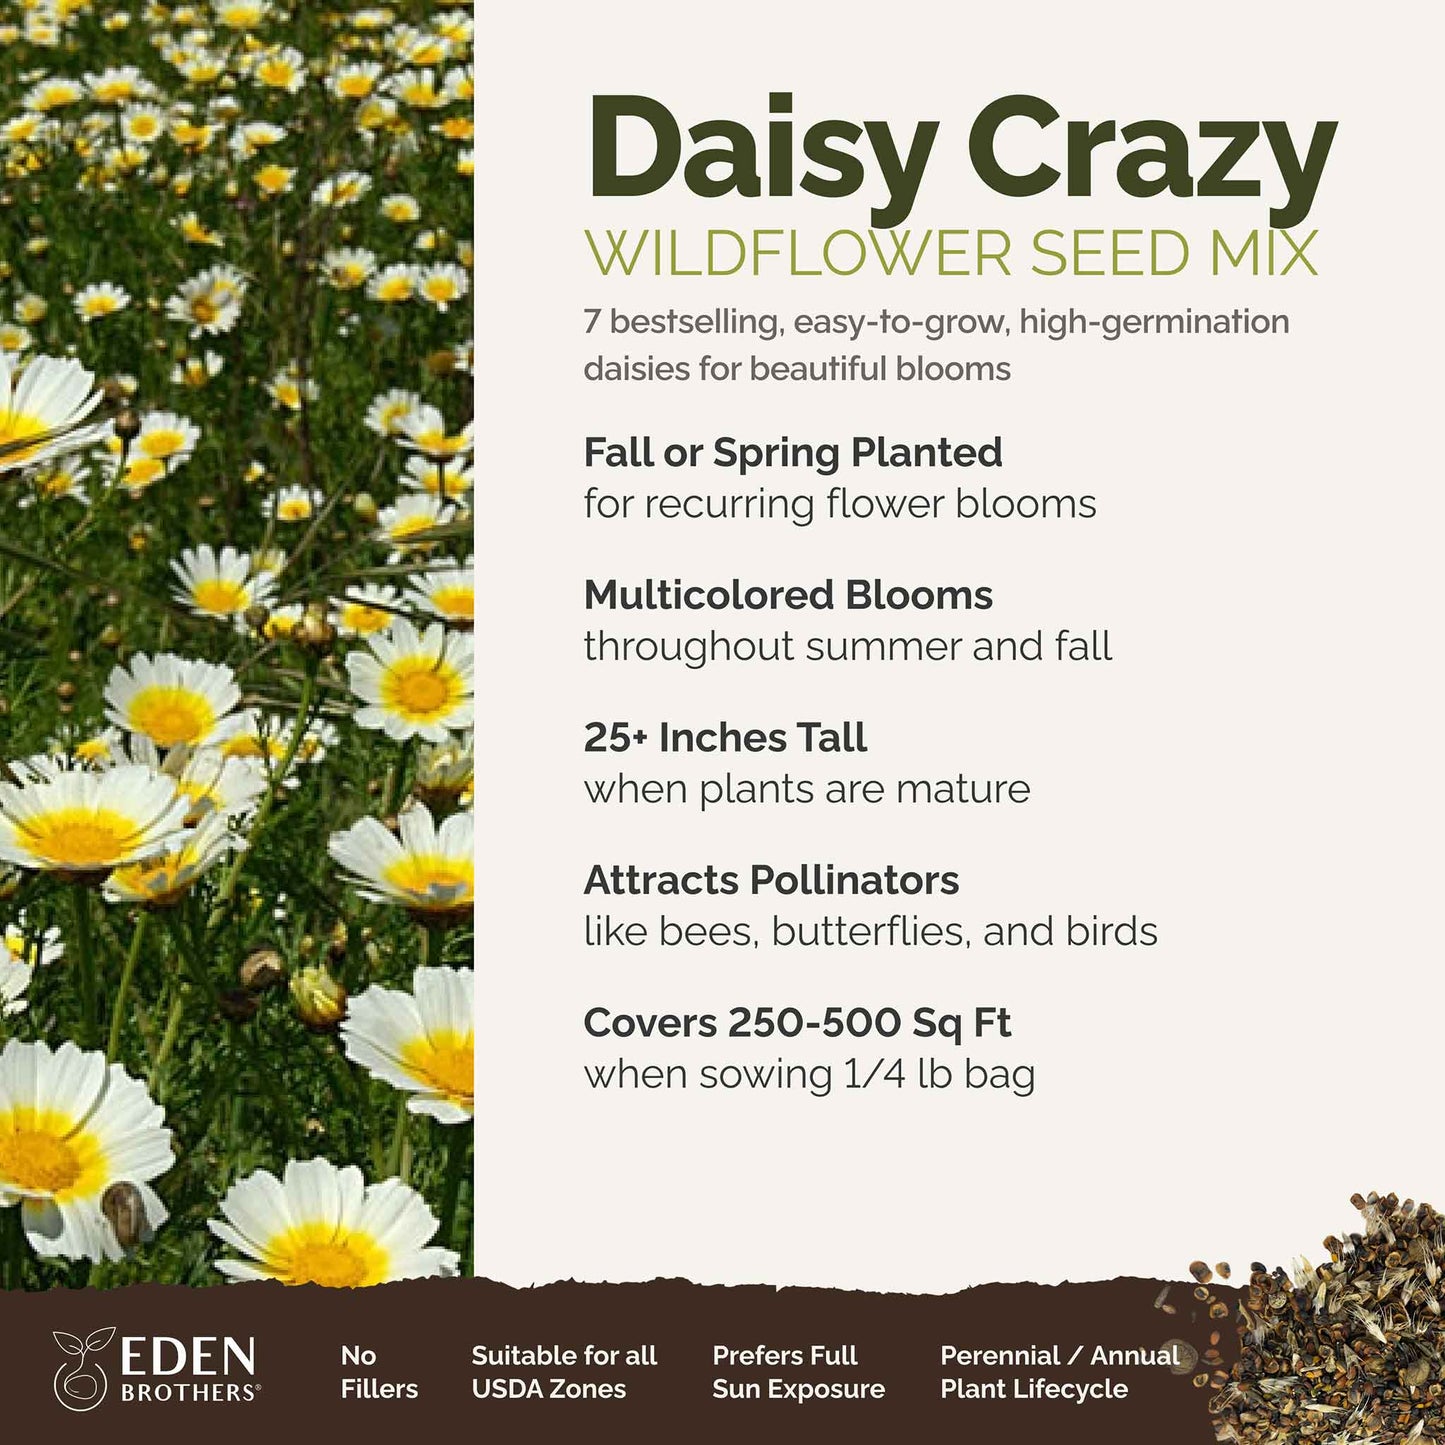 daisy crazy overview